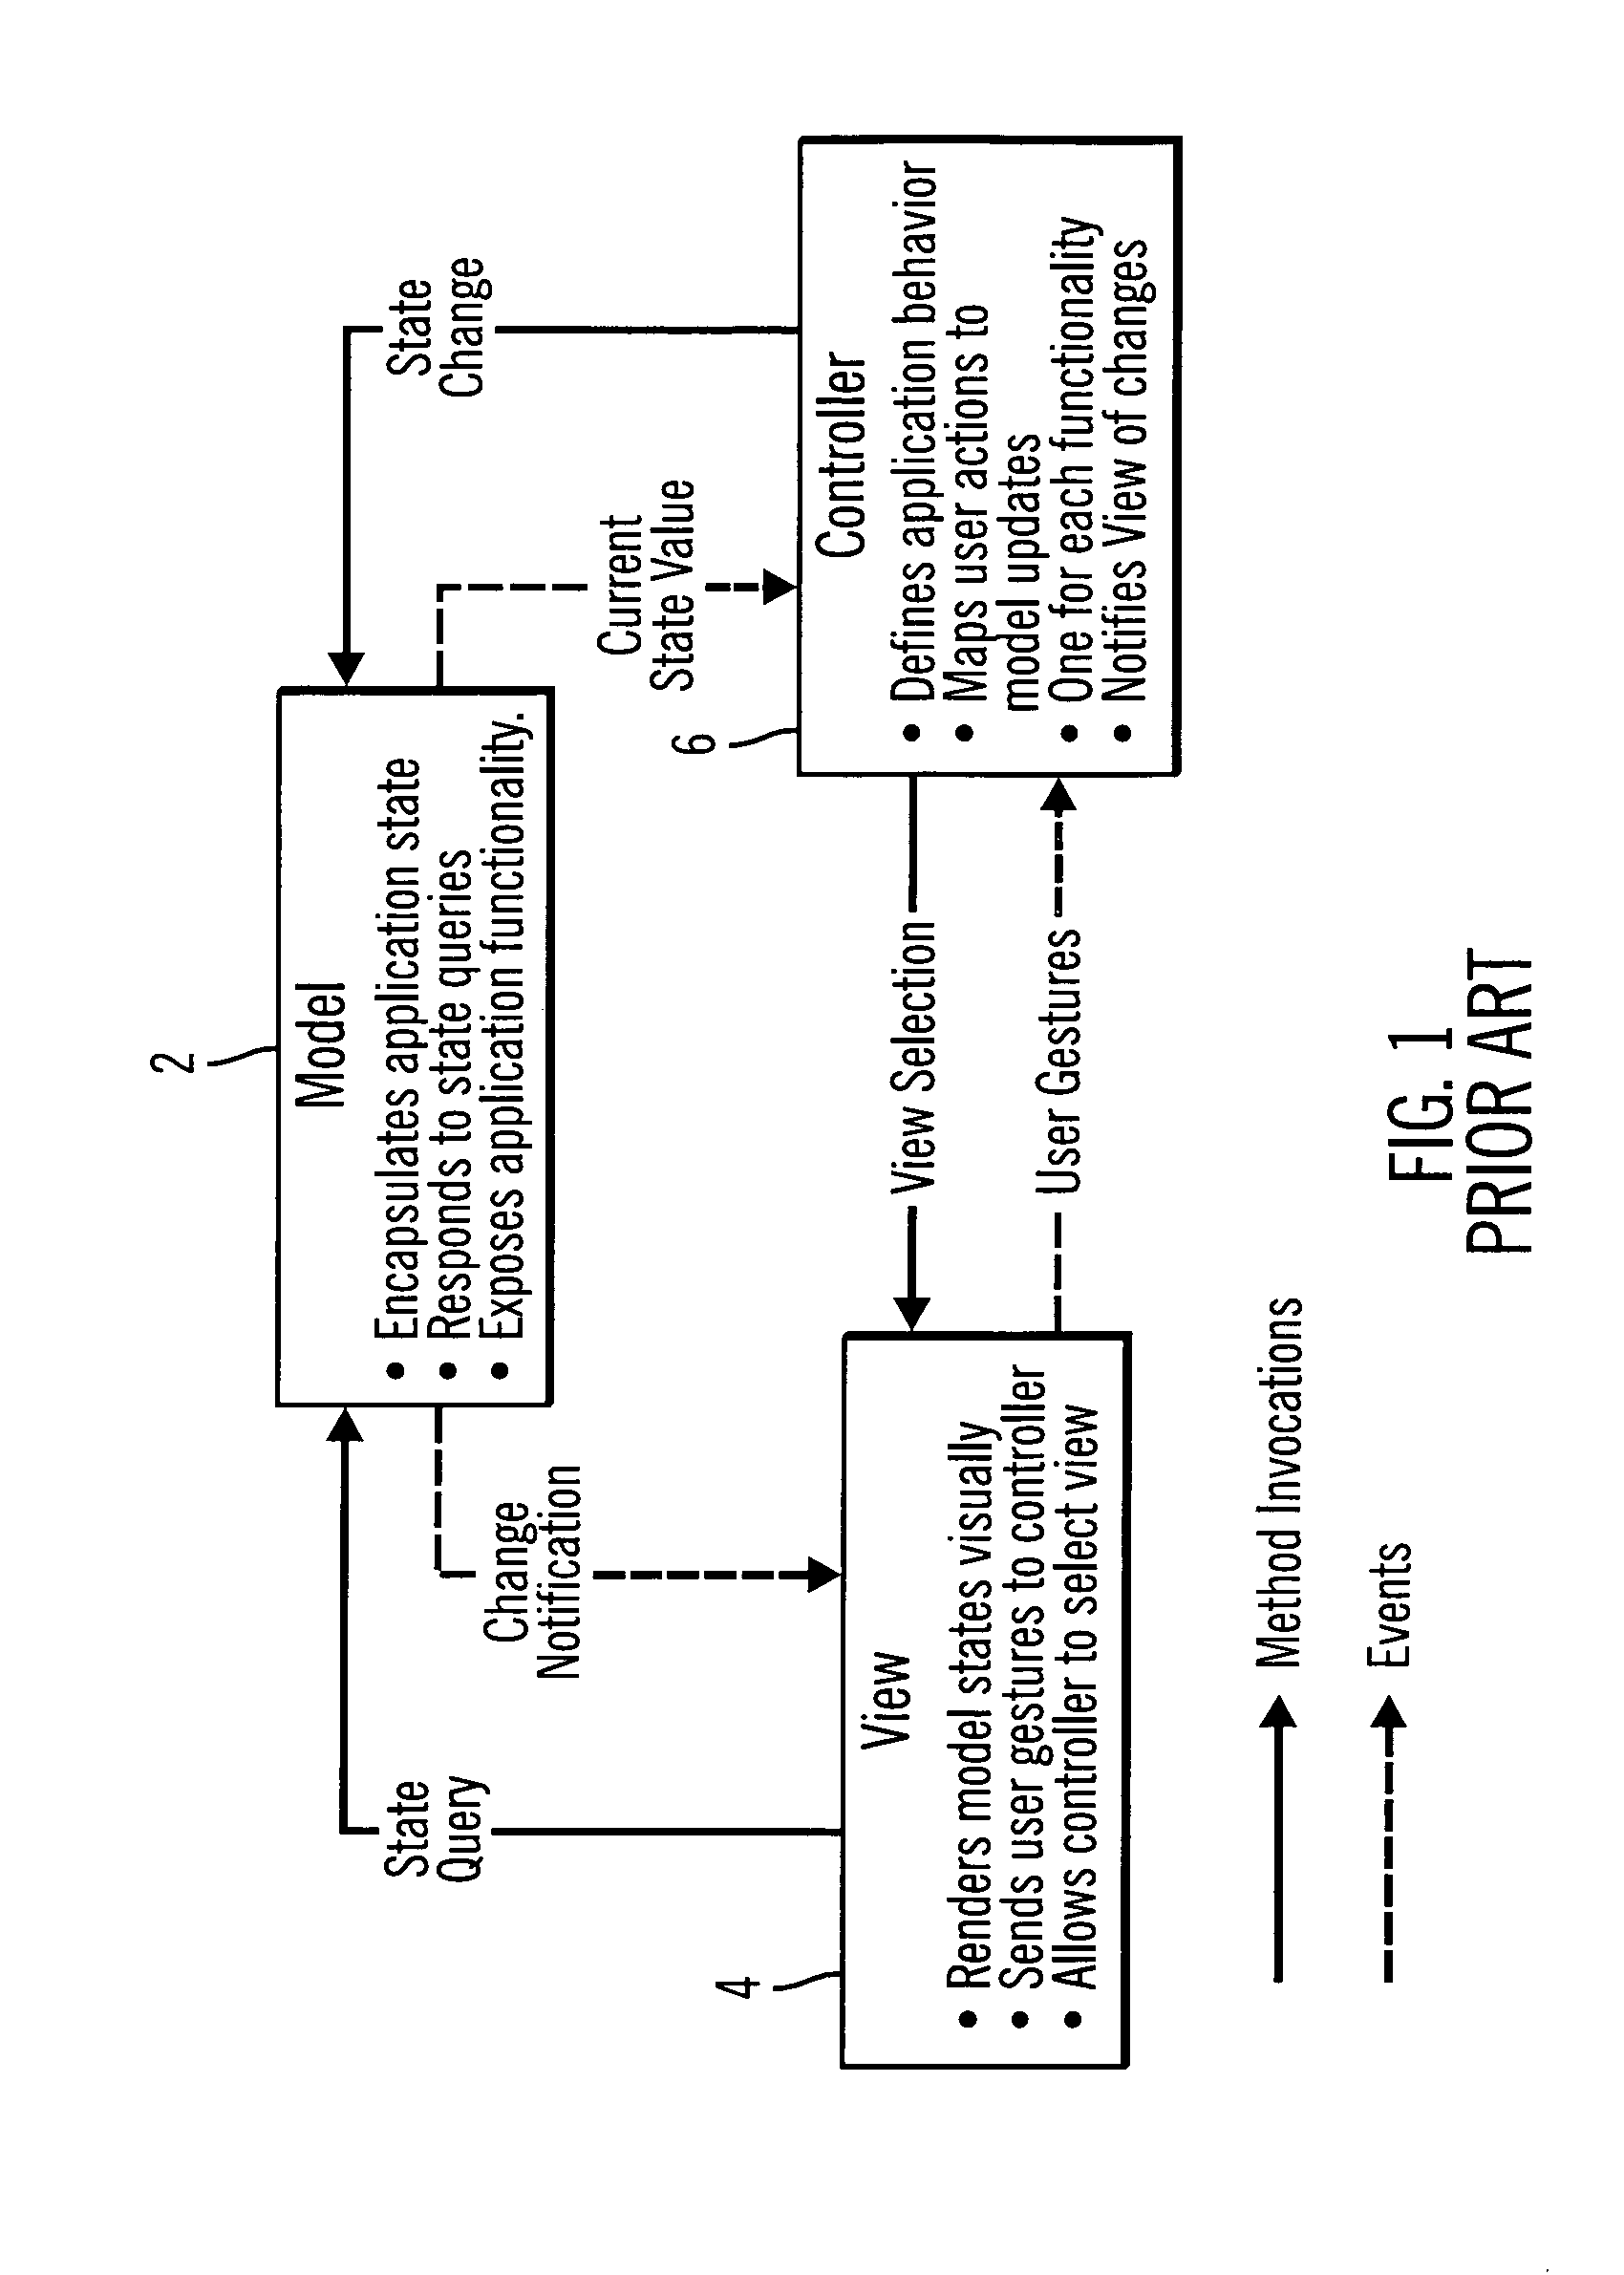 Method, system, and program for generating a user interface